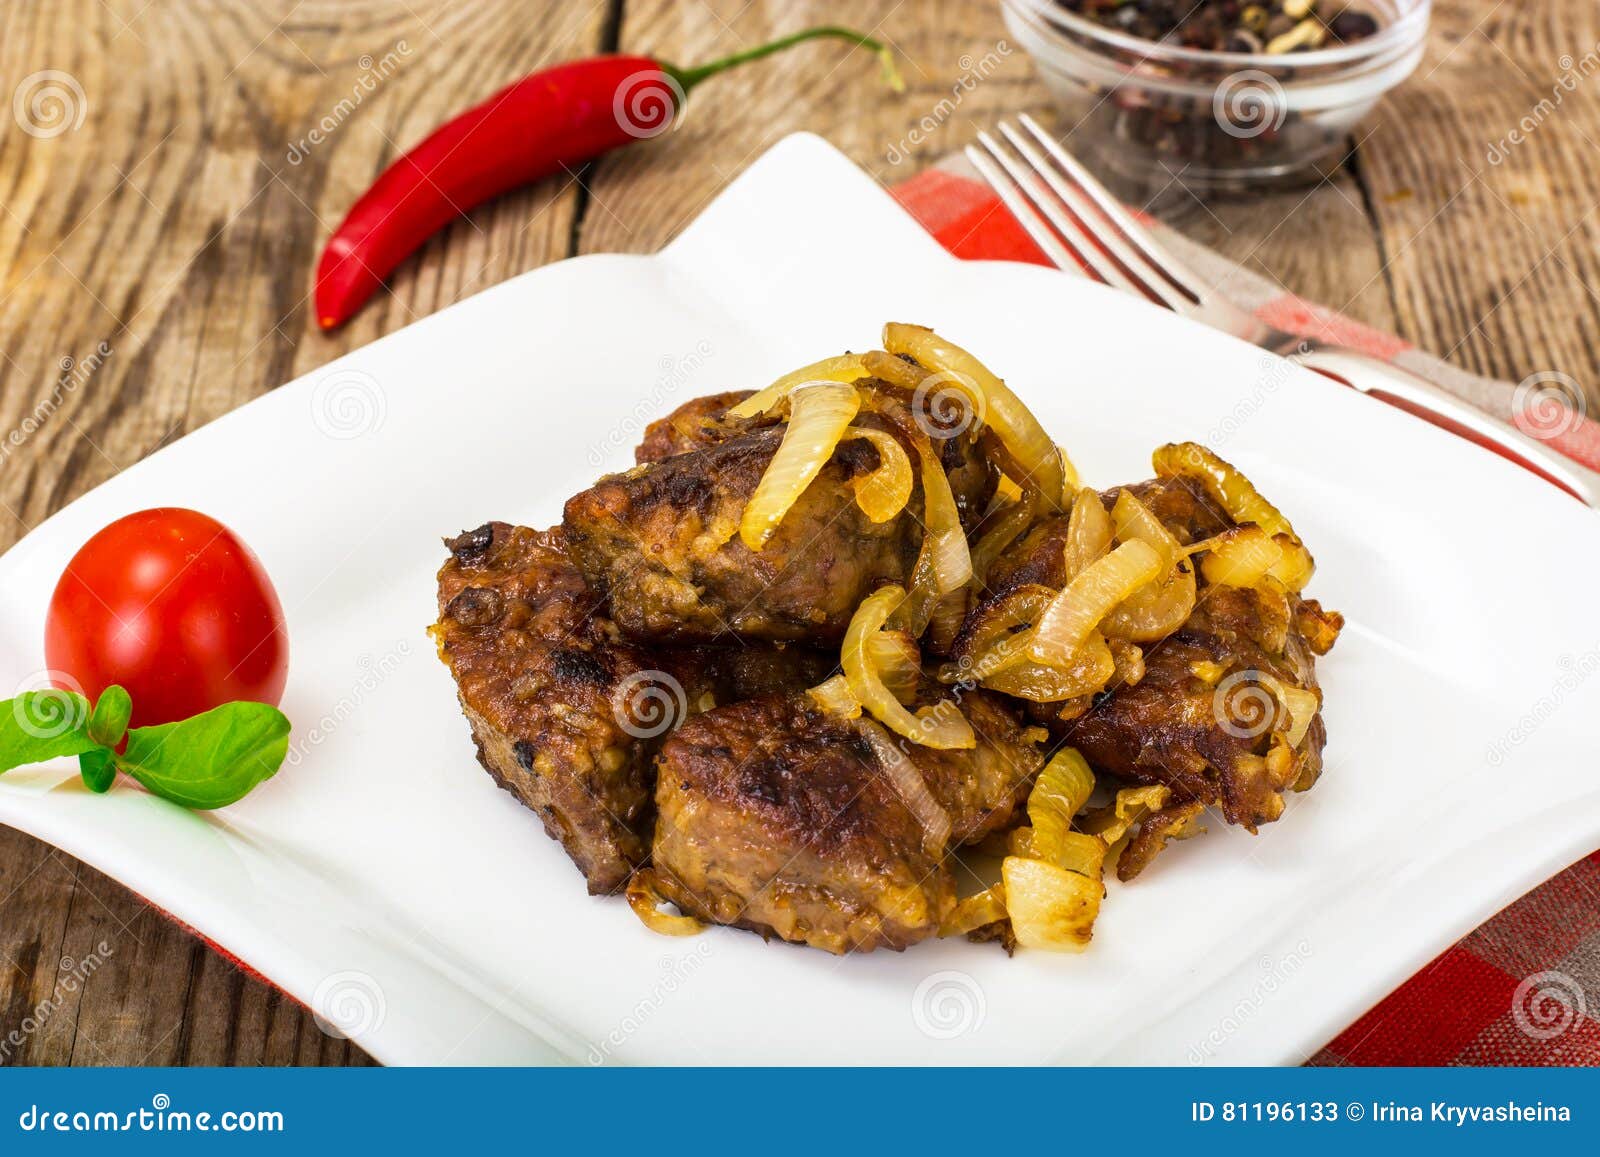 Fried Beef Liver with Onions, Curry and Spices Stock Image - Image of ...